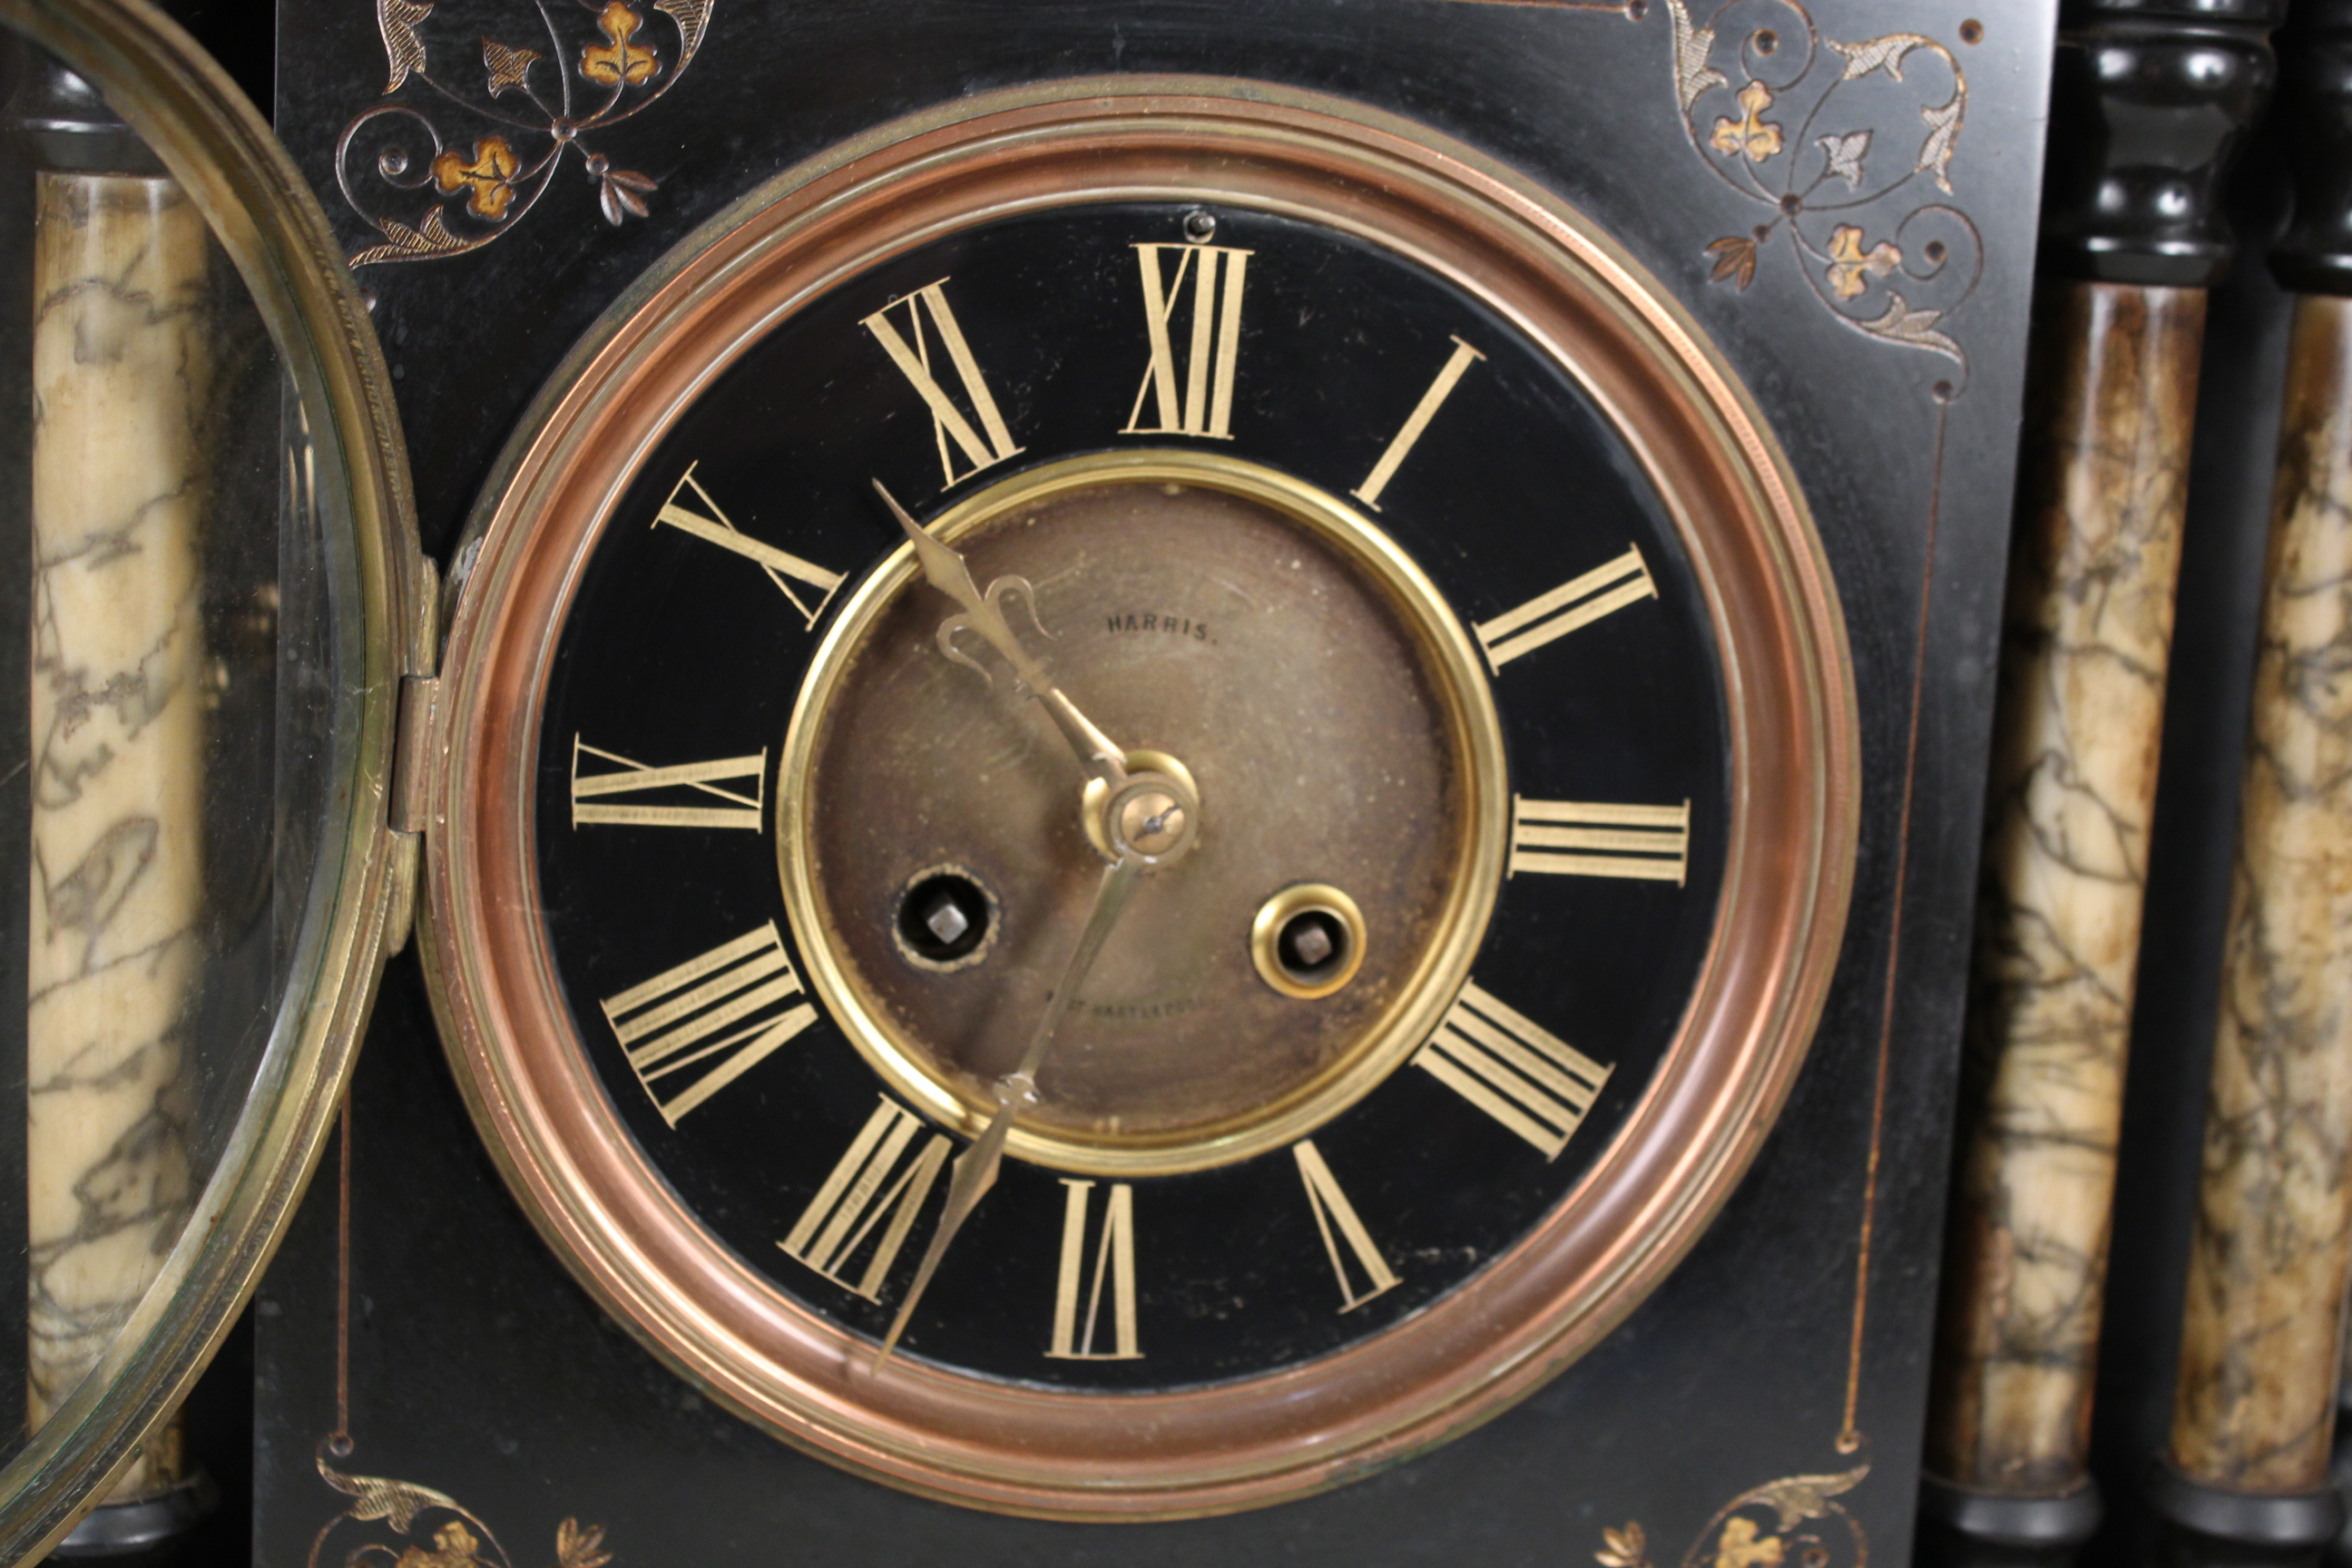 A substantial black marble mantel clock with gilt painted decoration and pale marble columns - Image 2 of 3